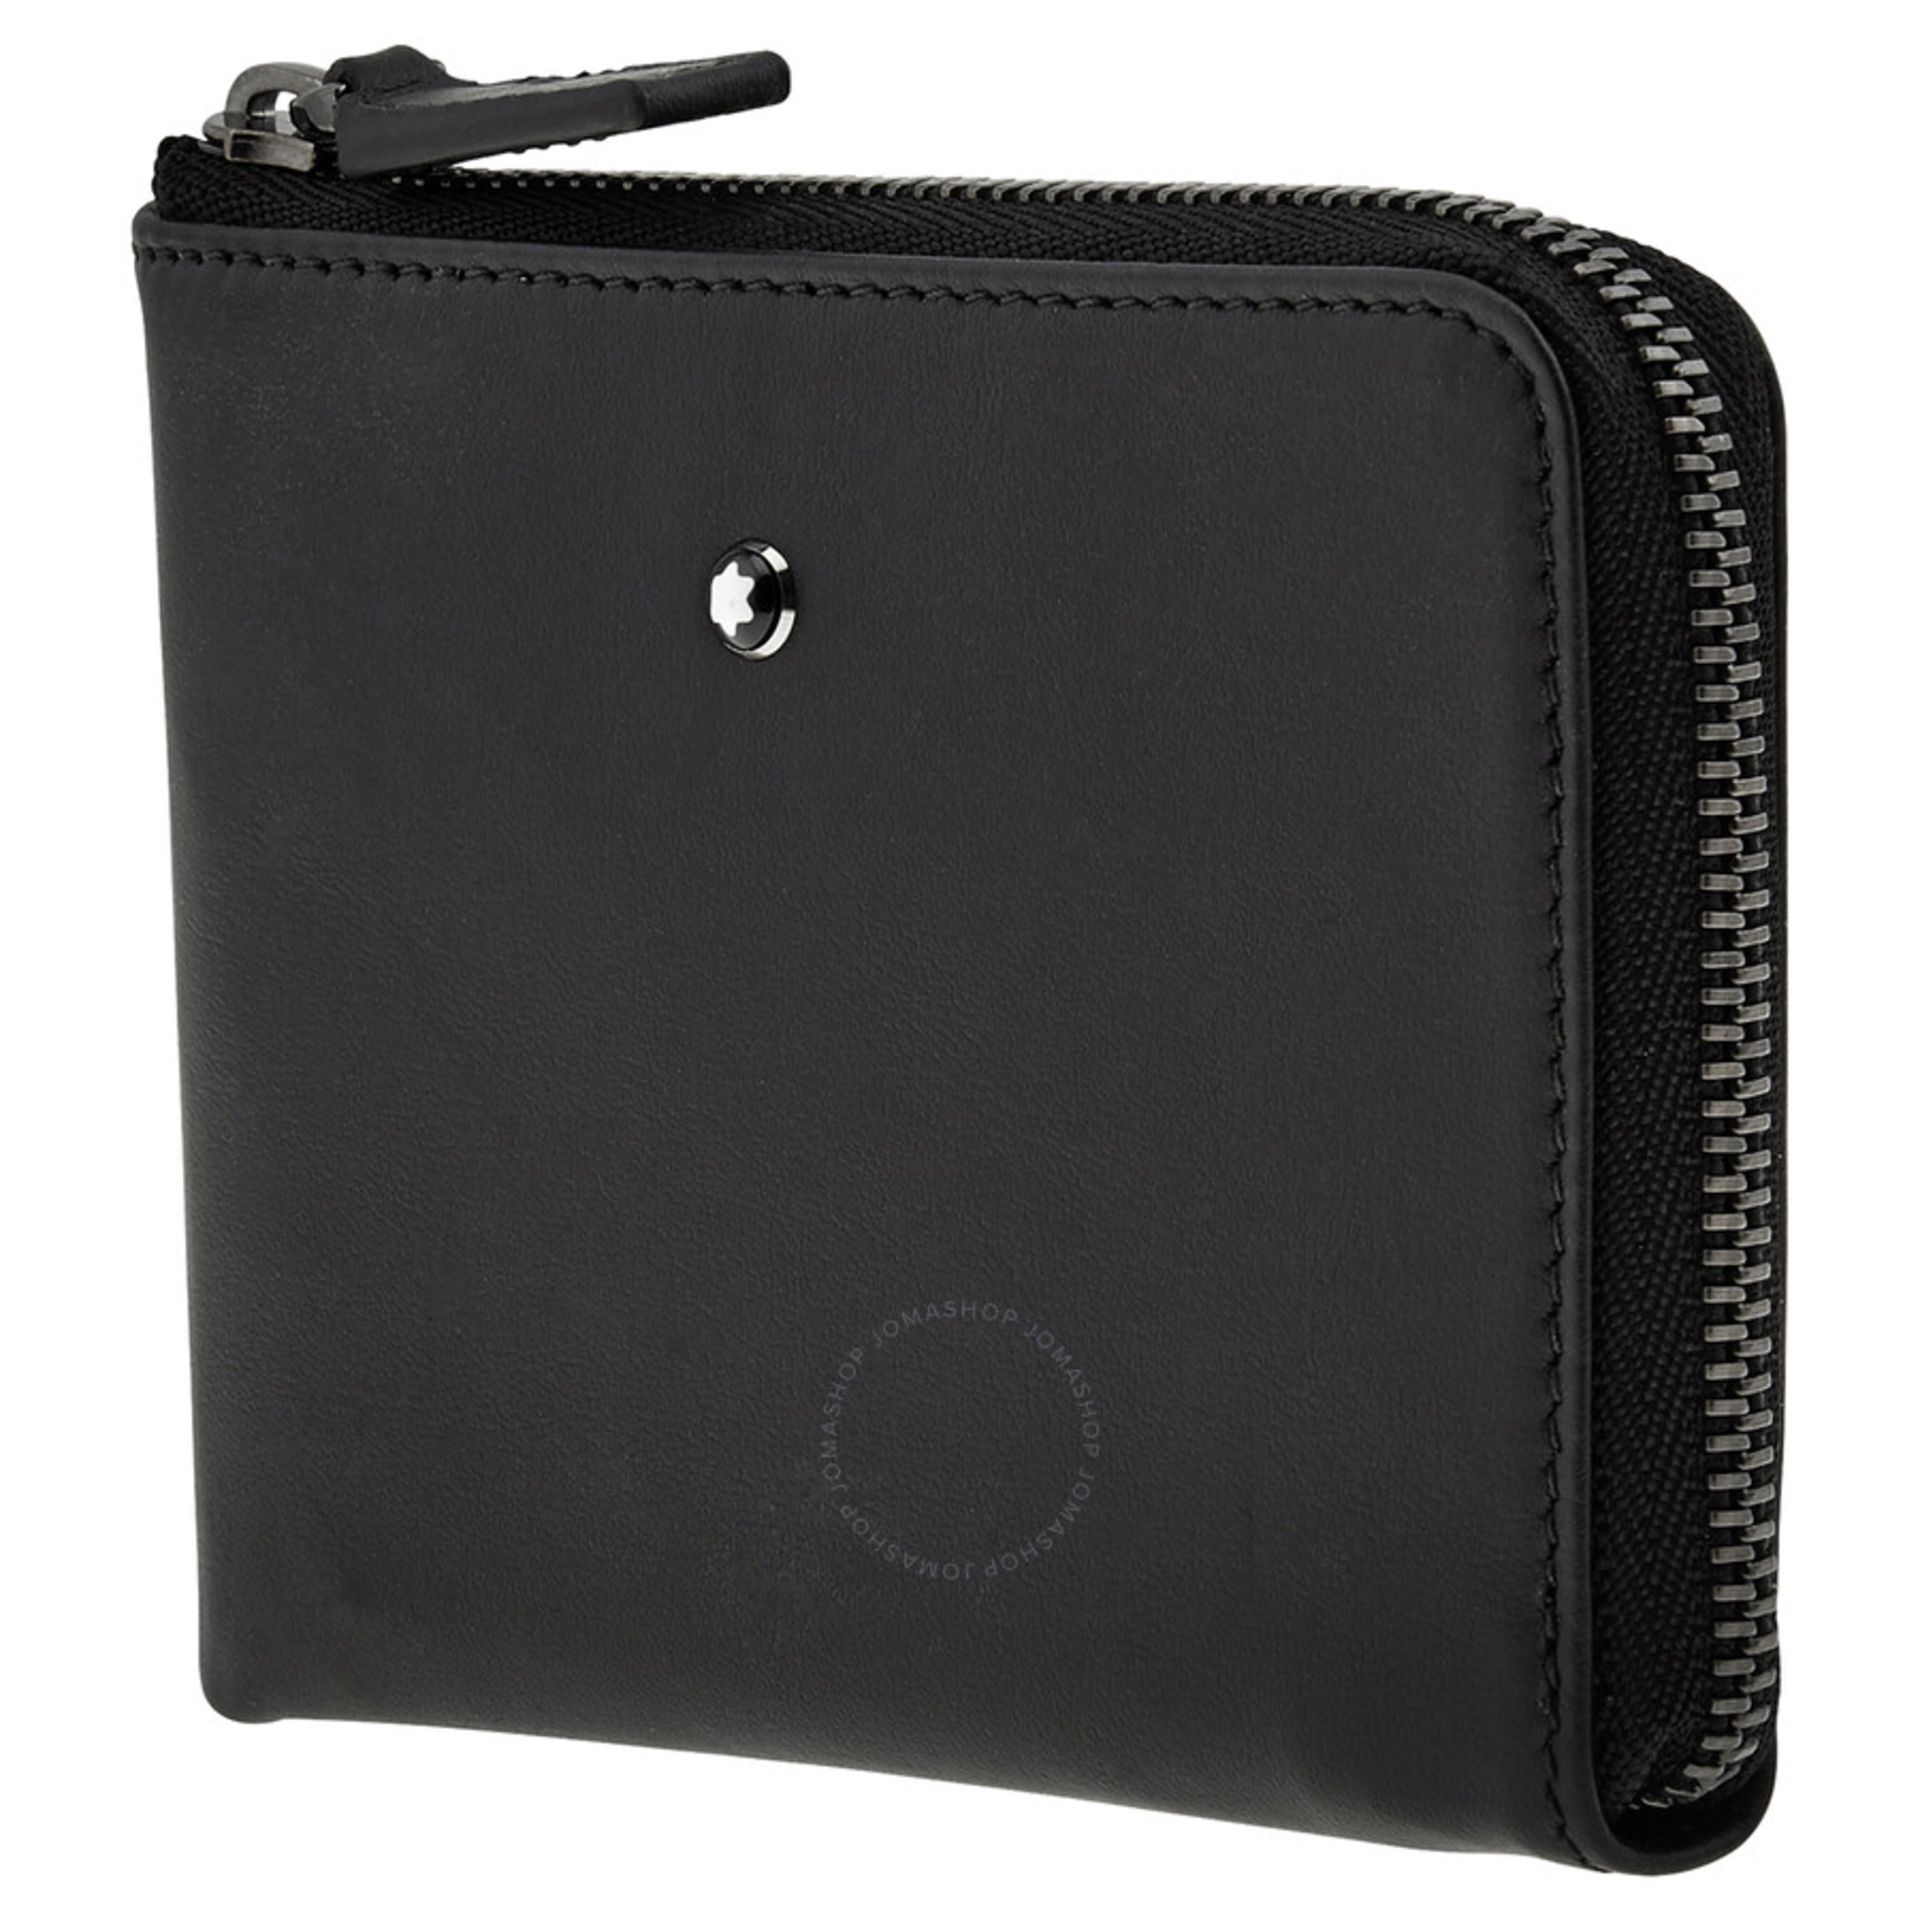 BRAND NEW Montblanc Nightflight Men's Small Black Leather Business Card Holder RRP £175